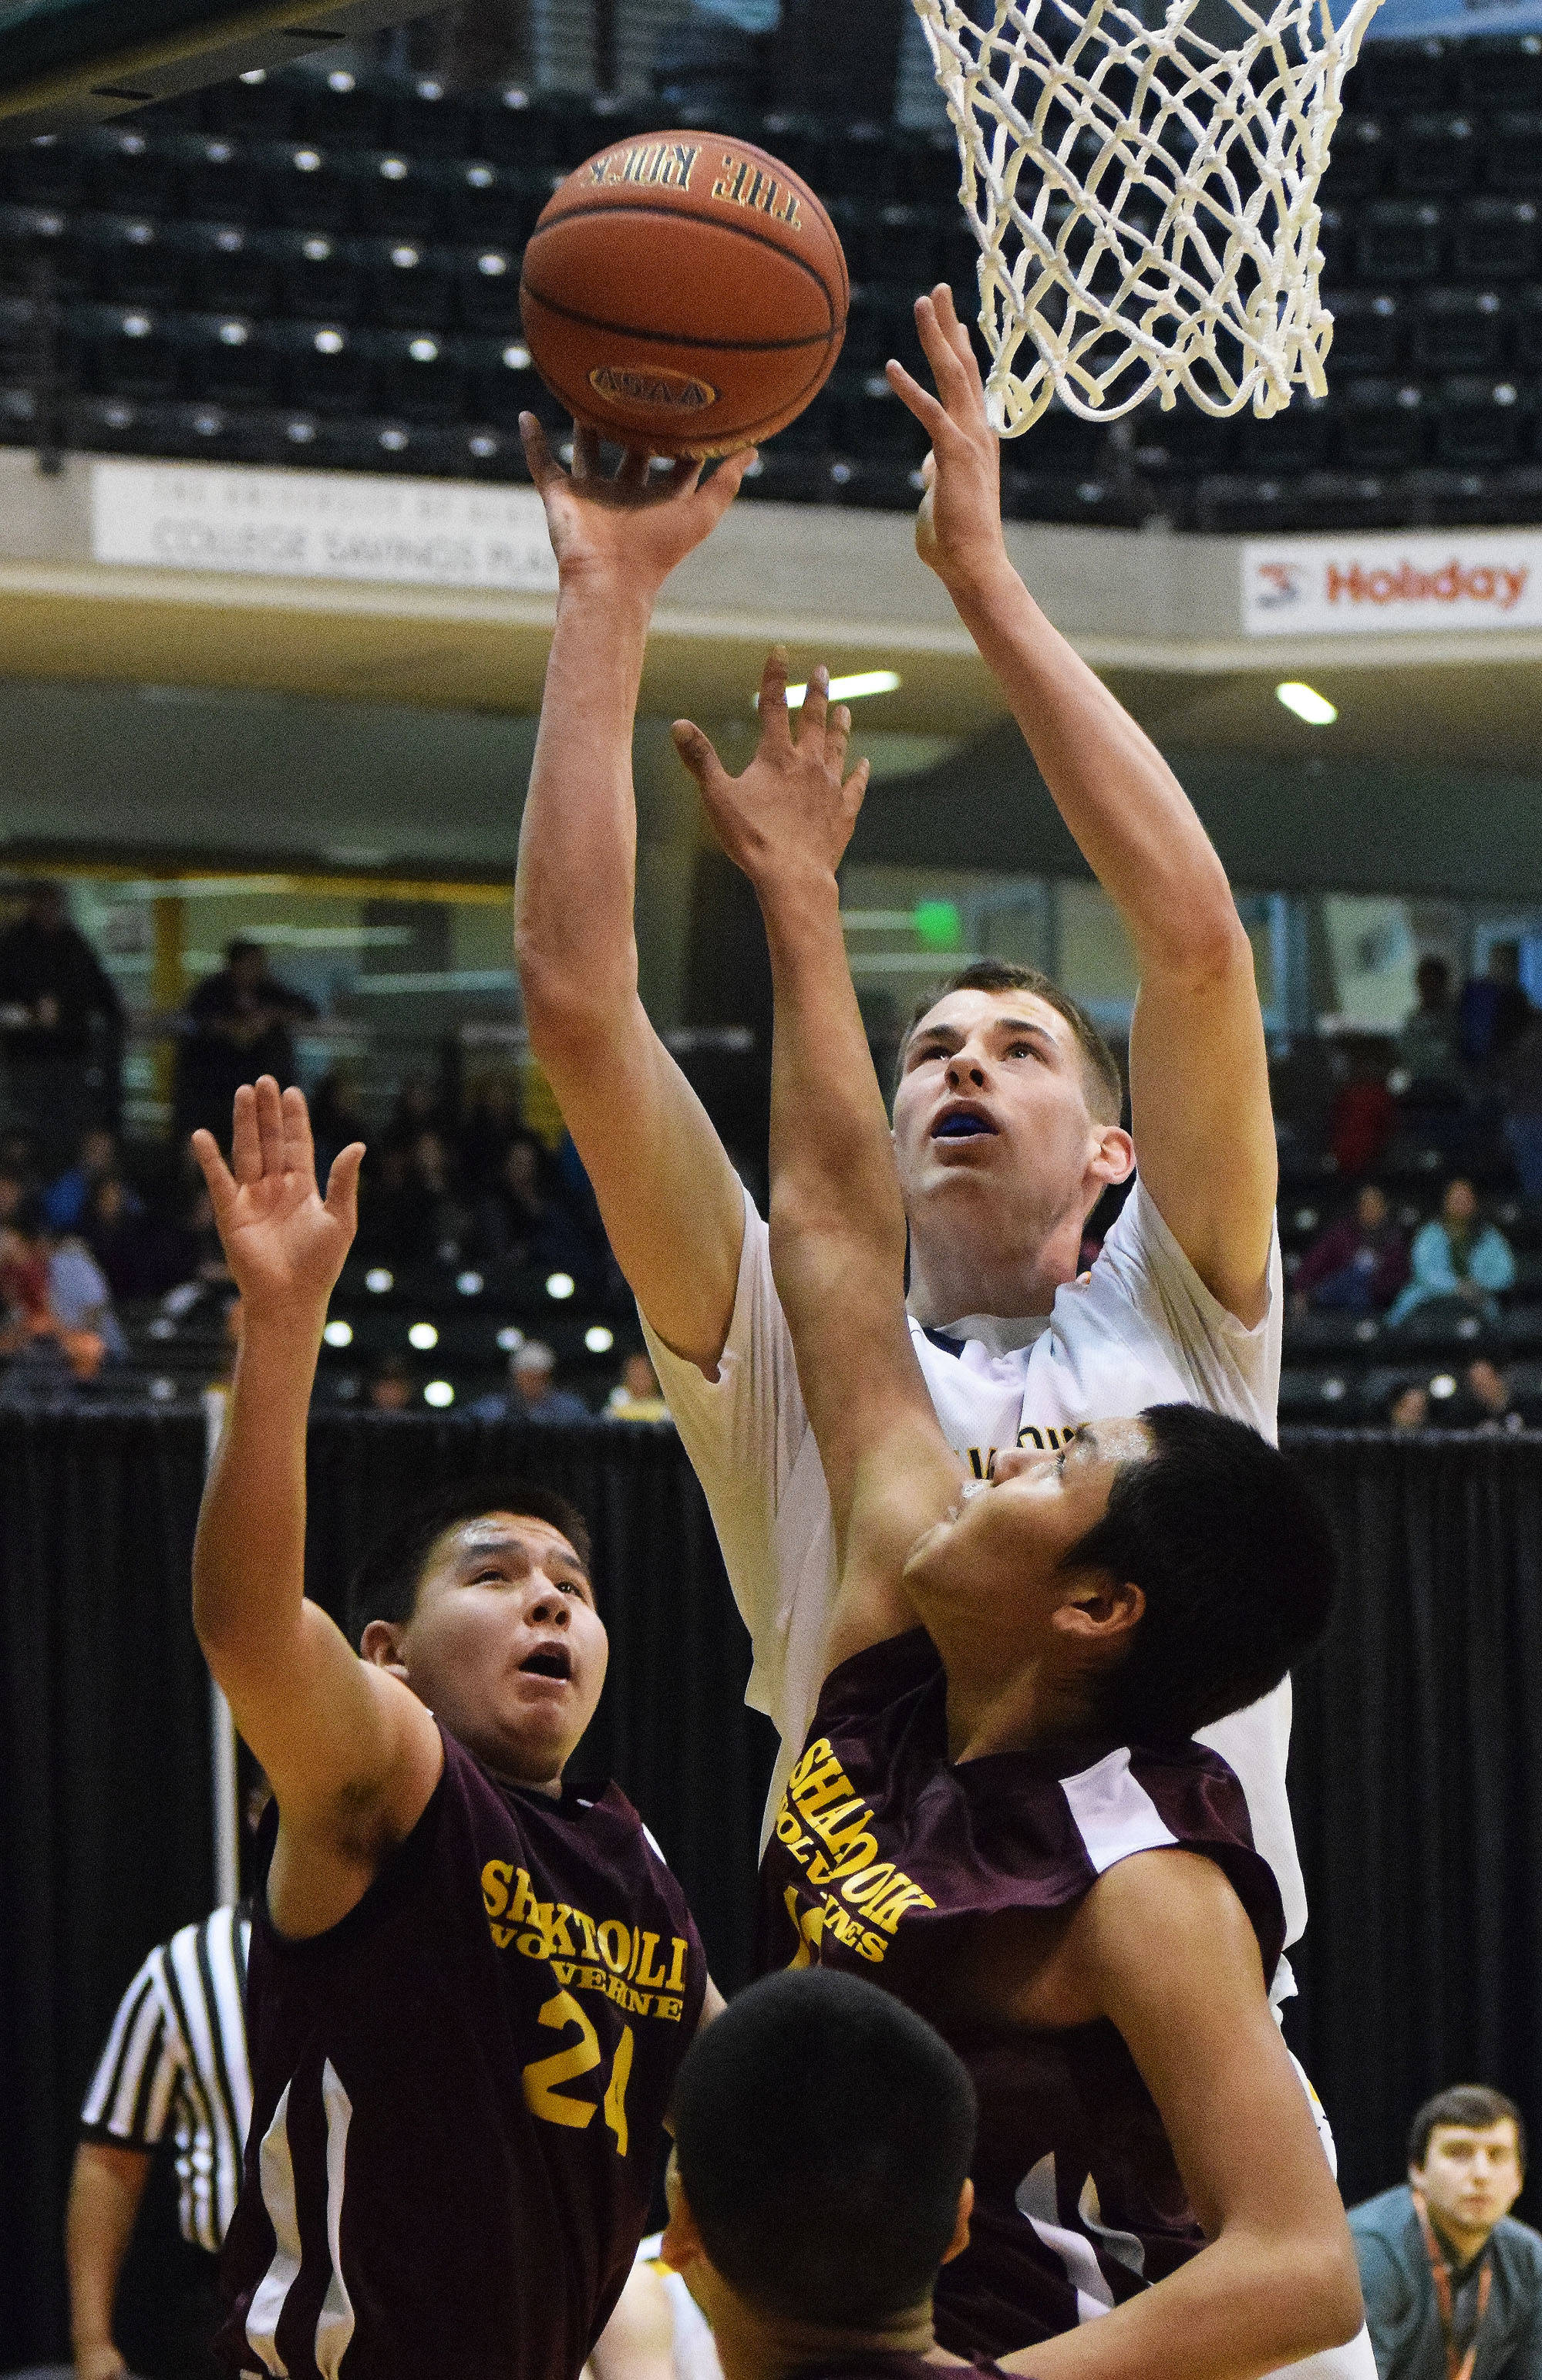 Ninilchik’s Austin White rises above a slew of Shaktoolik defenders Thursday, March 16, 2017, afternoon at the Class 1A state basketball tournament at the Alaska Airlines Center in Anchorage. (Photo by Joey Klecka/Peninsula Clarion)